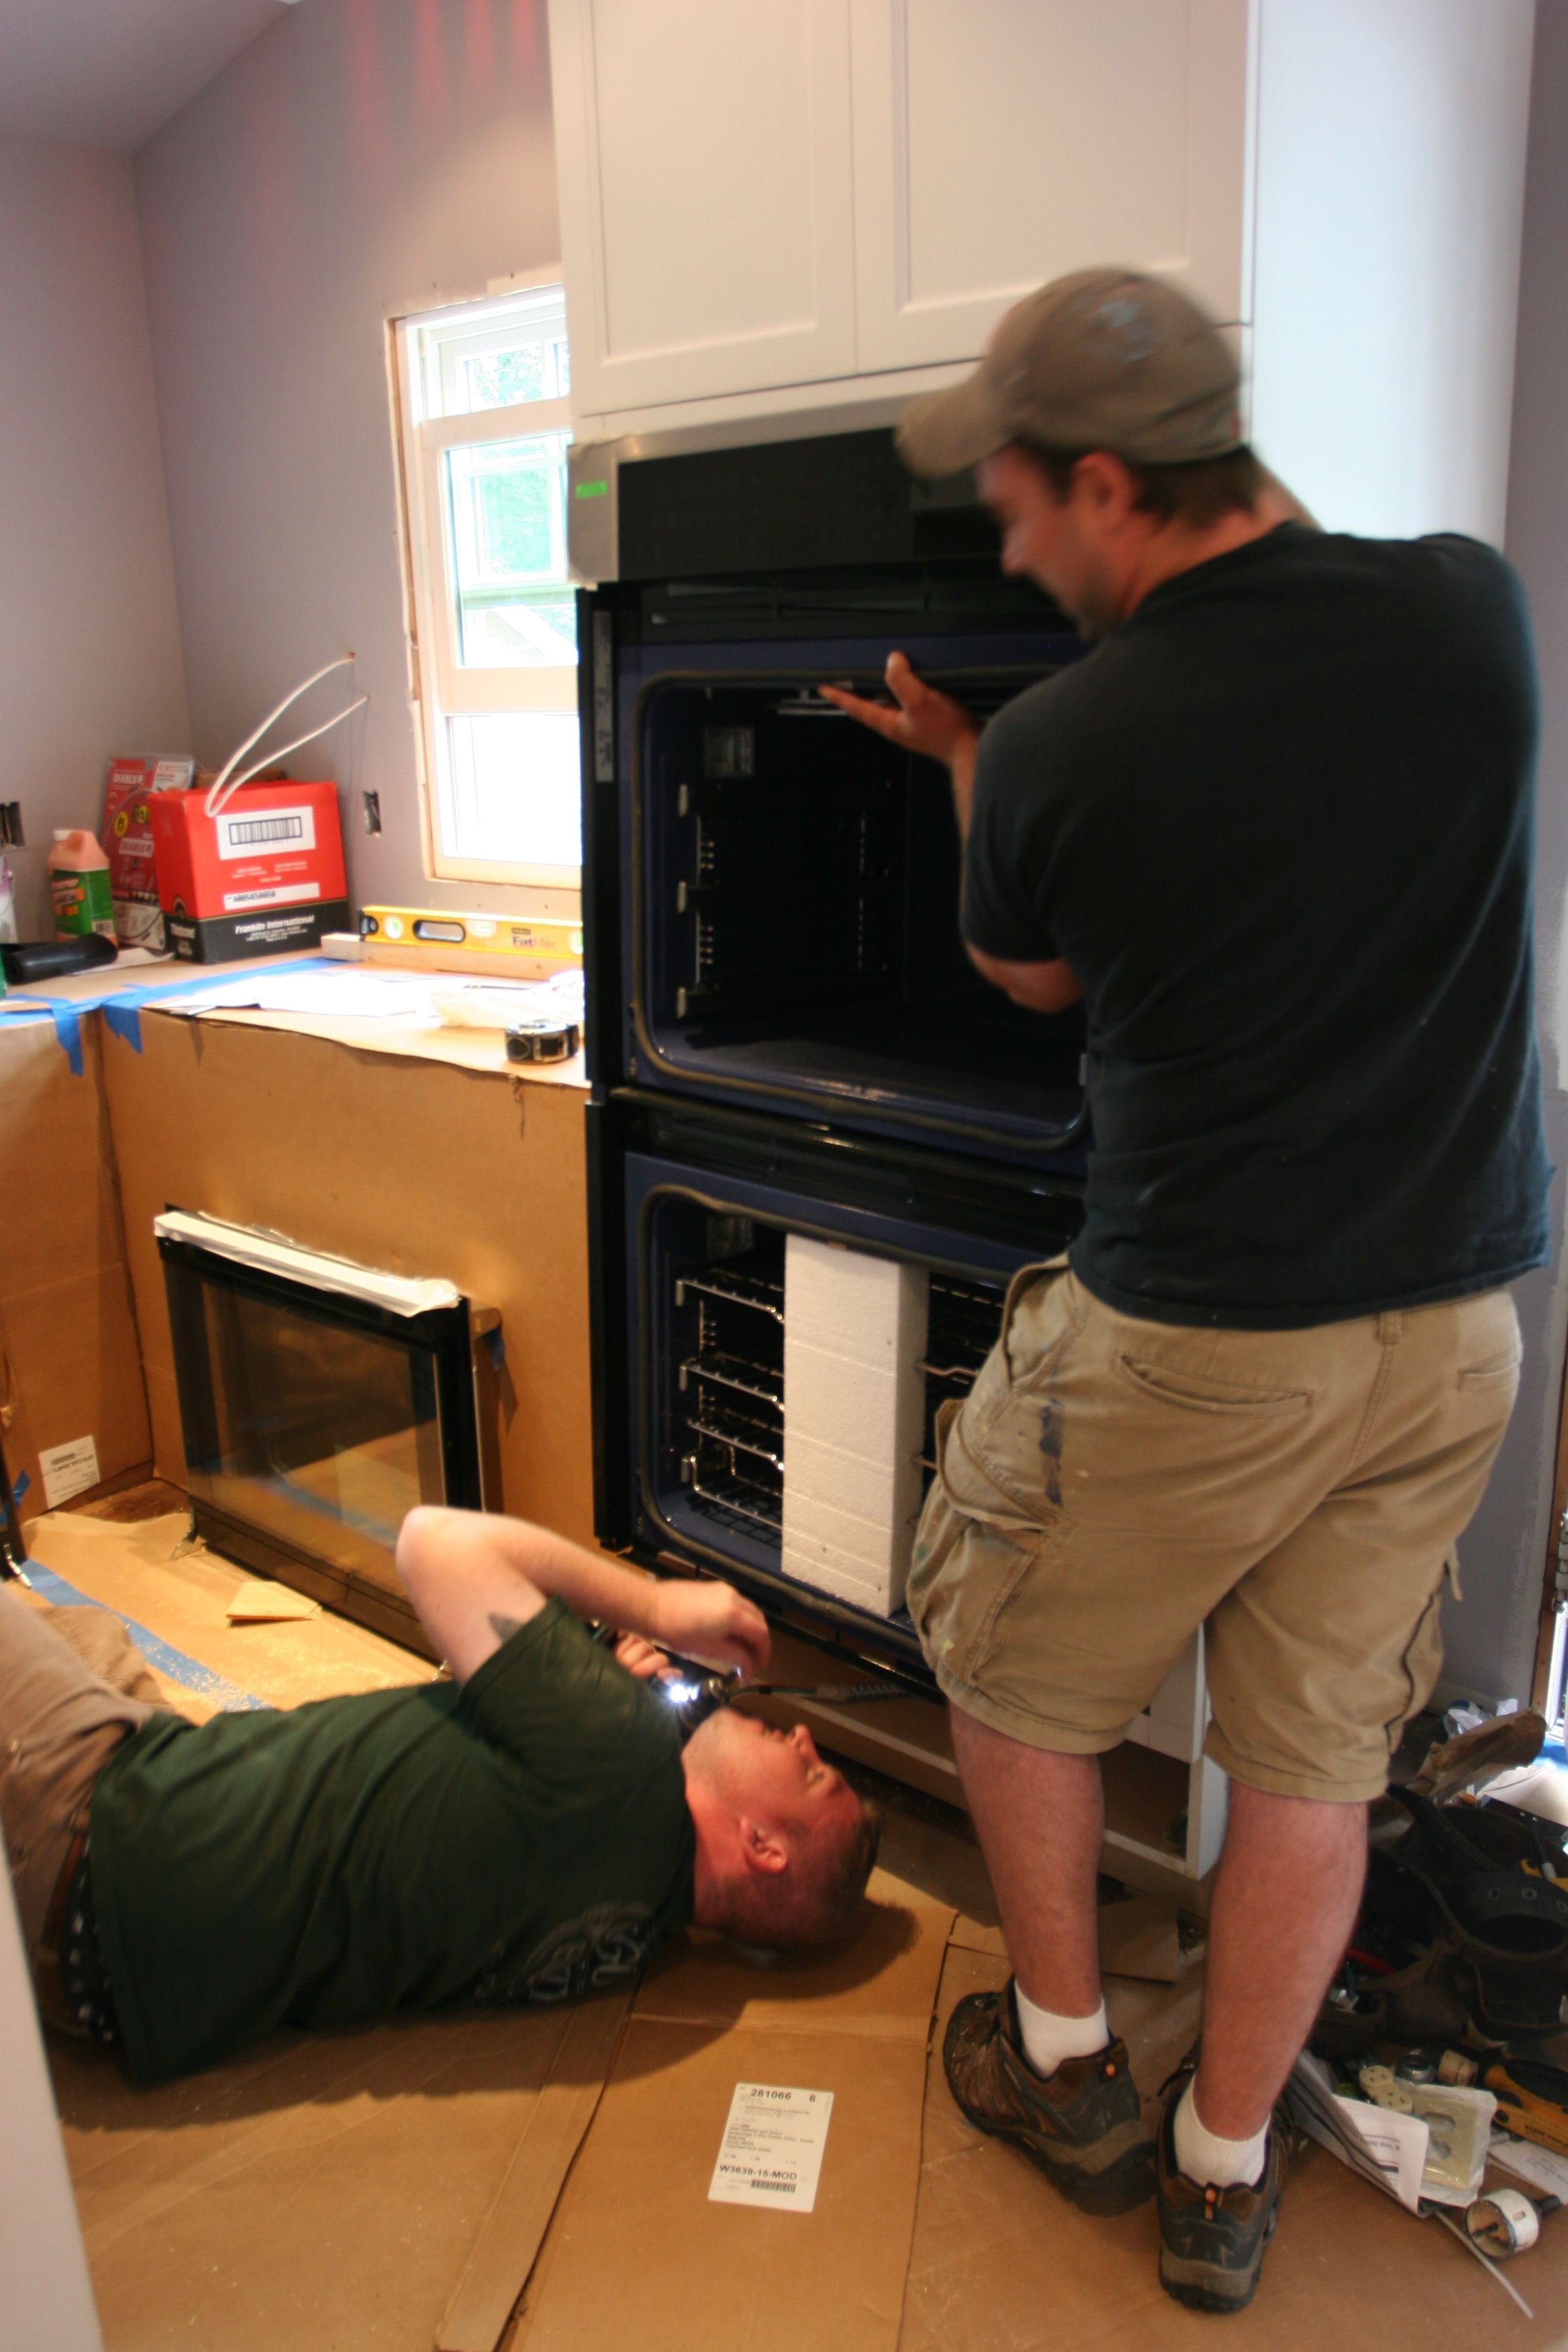 Brad in his favorite spot - the floor - installing the safety bracket for the wall ovens while Dave held the 200+ lb. appliance by himself.